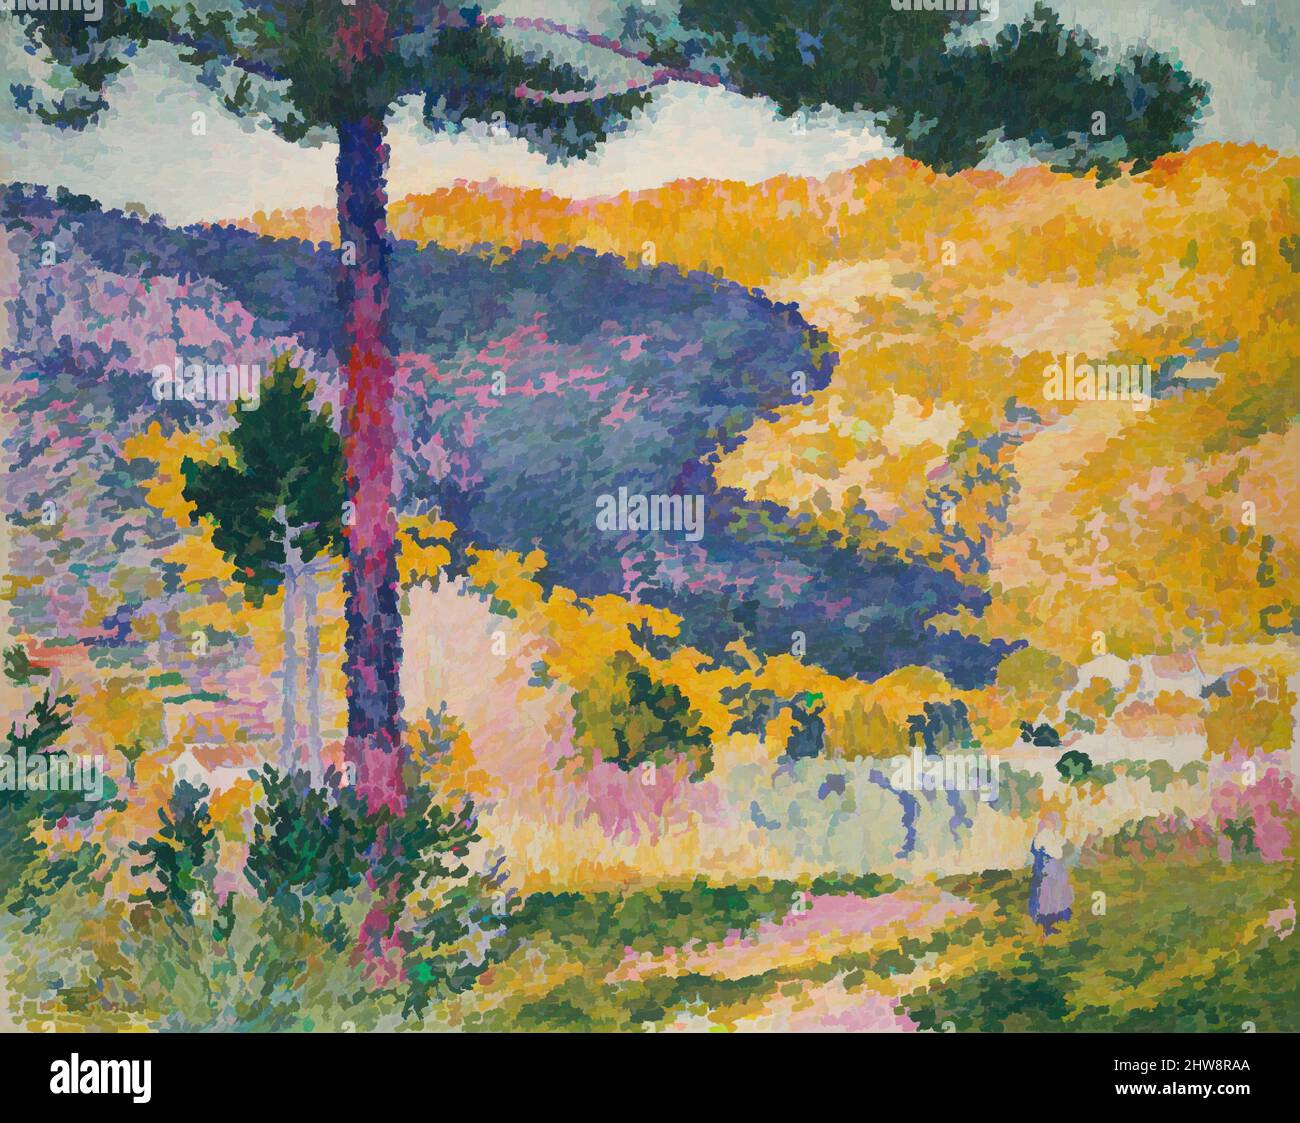 Art inspired by Valley with Fir (Shade on the Mountain), 1909, Oil on canvas, 29 x 35 1/2 in. (73.7 x 90.2 cm), Paintings, Henri-Edmond Cross (Henri-Edmond Delacroix) (French, Douai 1856–1910 Saint-Clair), Henri-Edmond Cross was a practitioner of the Neoimpressionist style of painting, Classic works modernized by Artotop with a splash of modernity. Shapes, color and value, eye-catching visual impact on art. Emotions through freedom of artworks in a contemporary way. A timeless message pursuing a wildly creative new direction. Artists turning to the digital medium and creating the Artotop NFT Stock Photo